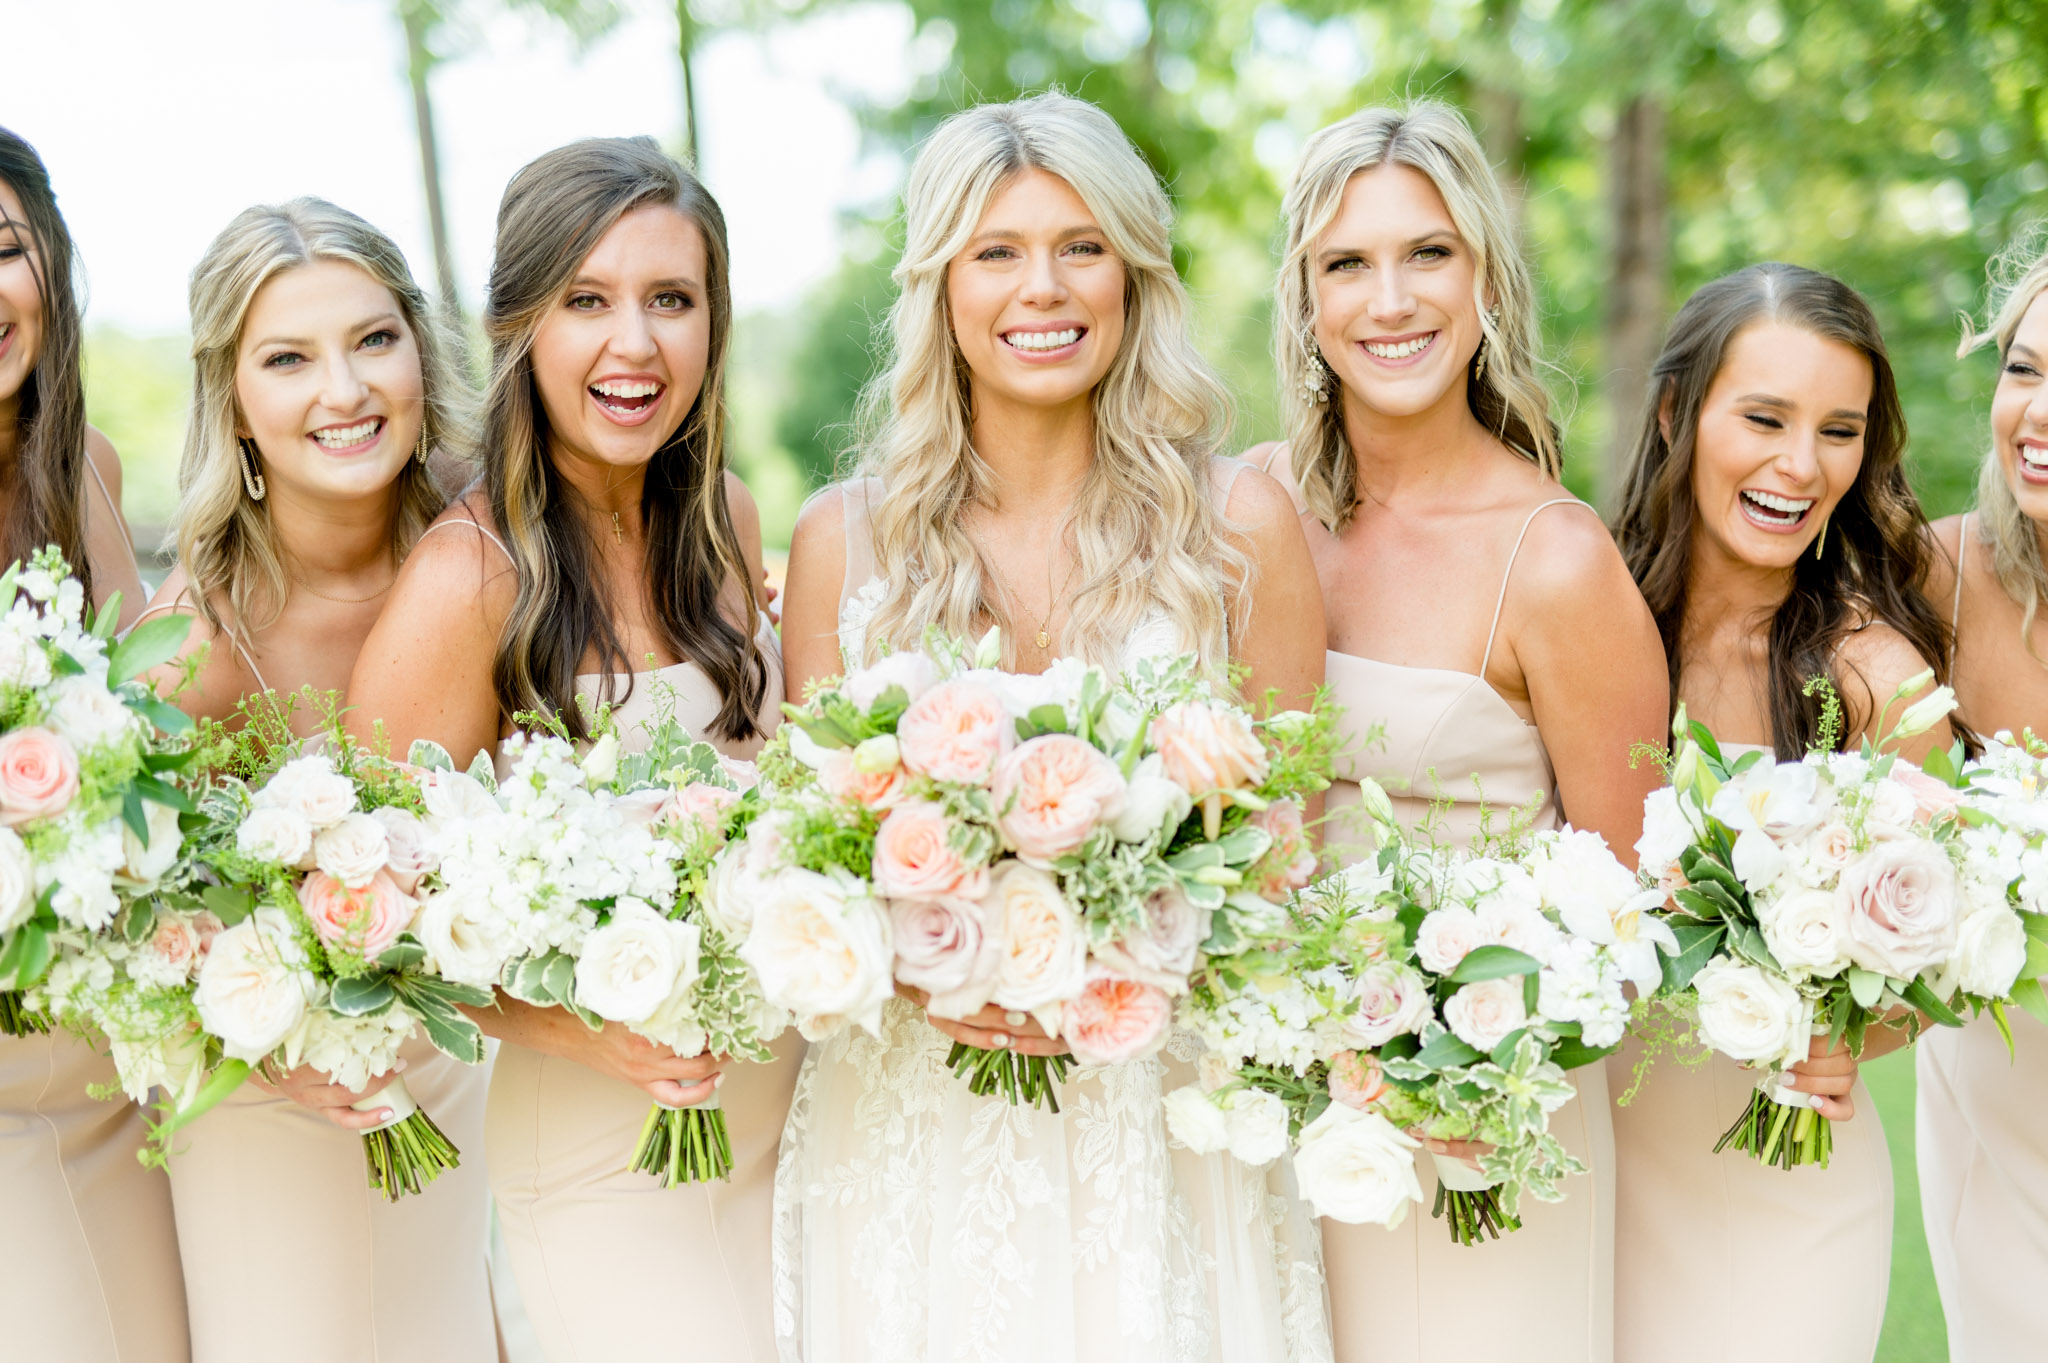 Bride and her maids smile at the camera.